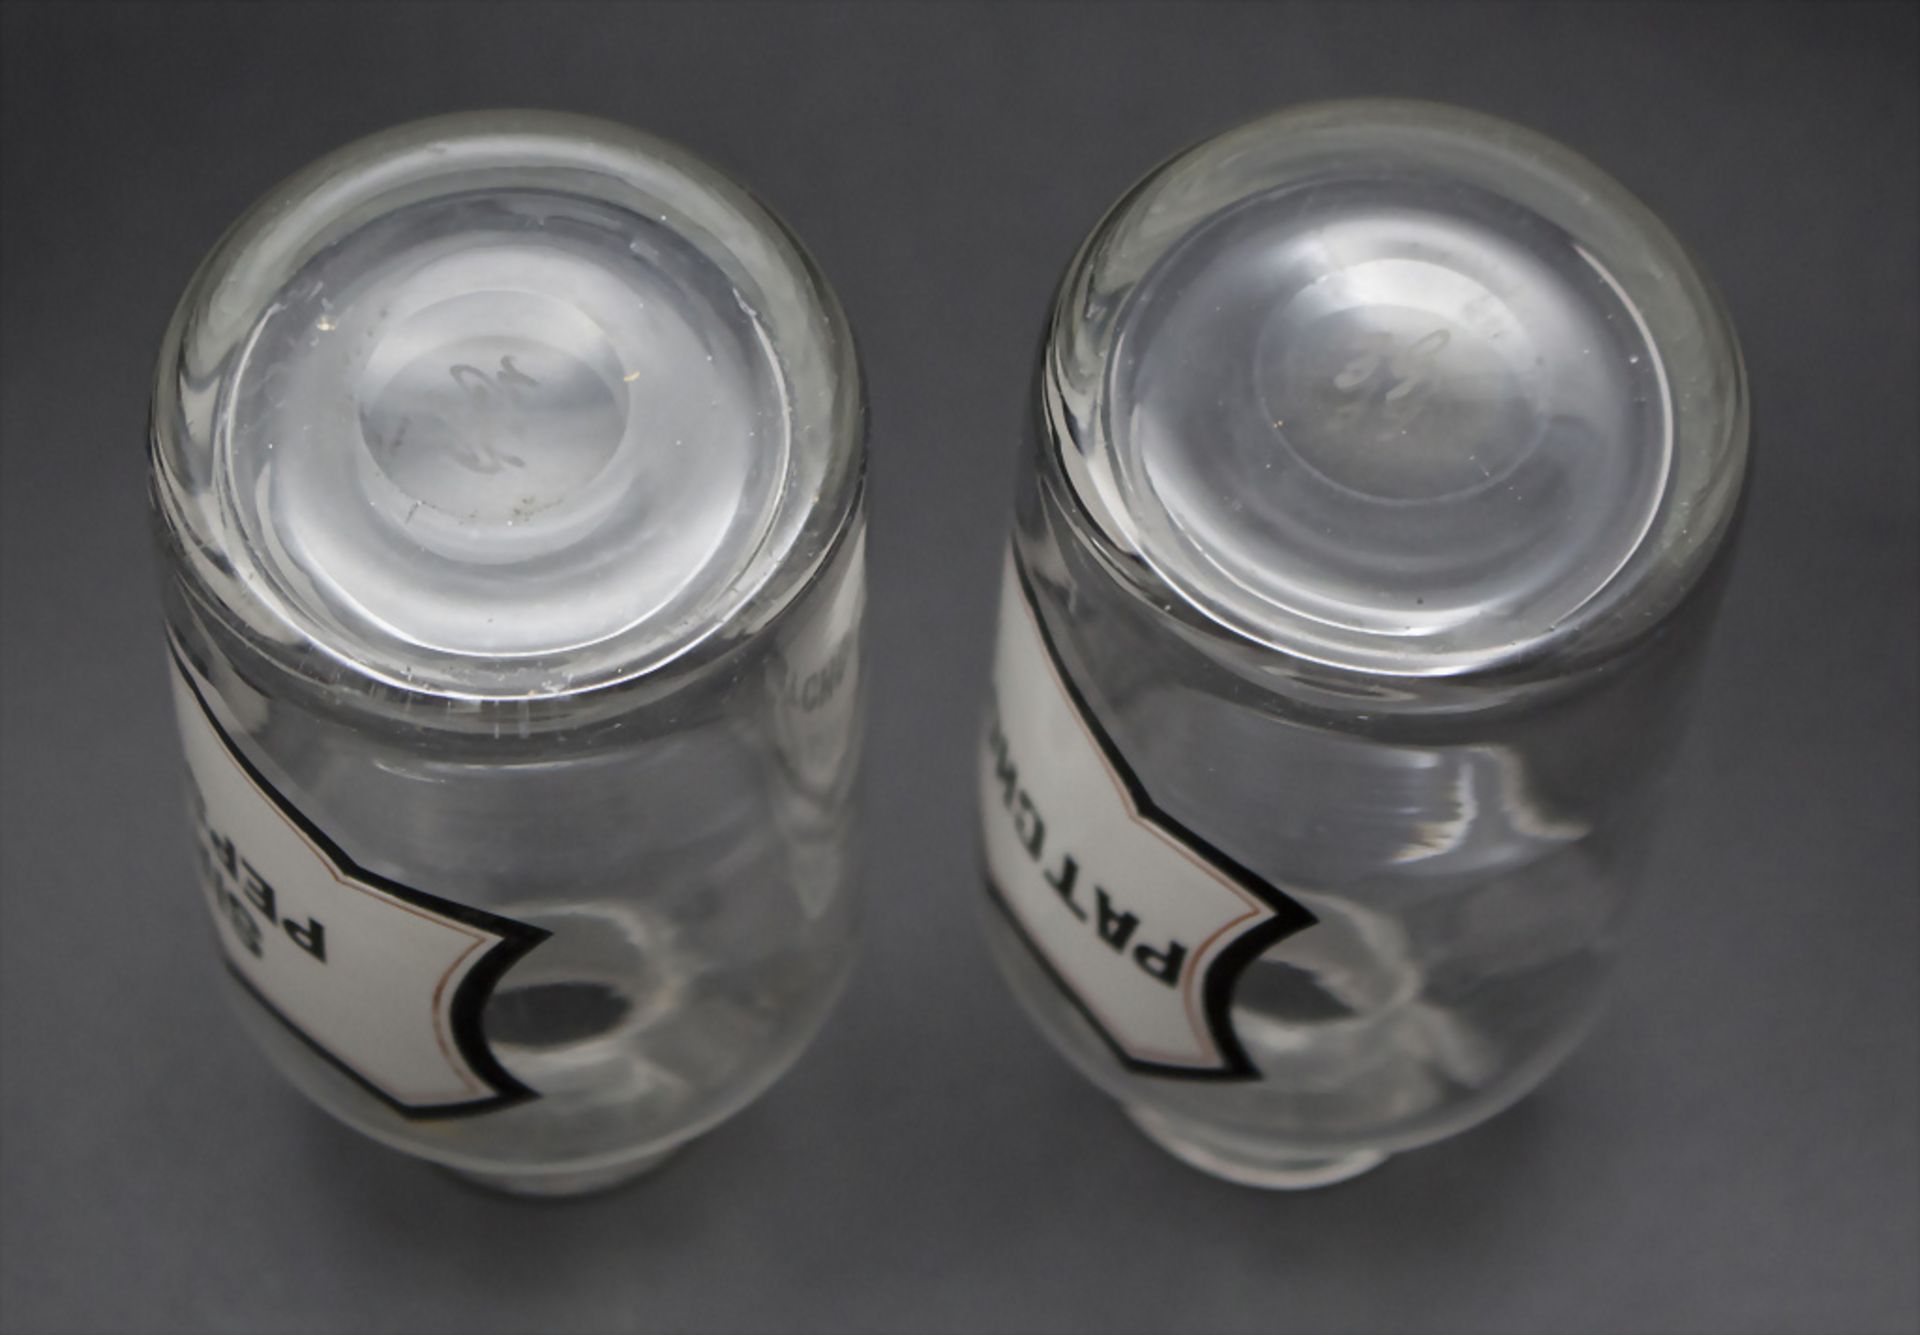 2 Apothekerflaschen / 2 apothecary glass bottles, 19. / 20. Jh. - Image 2 of 2